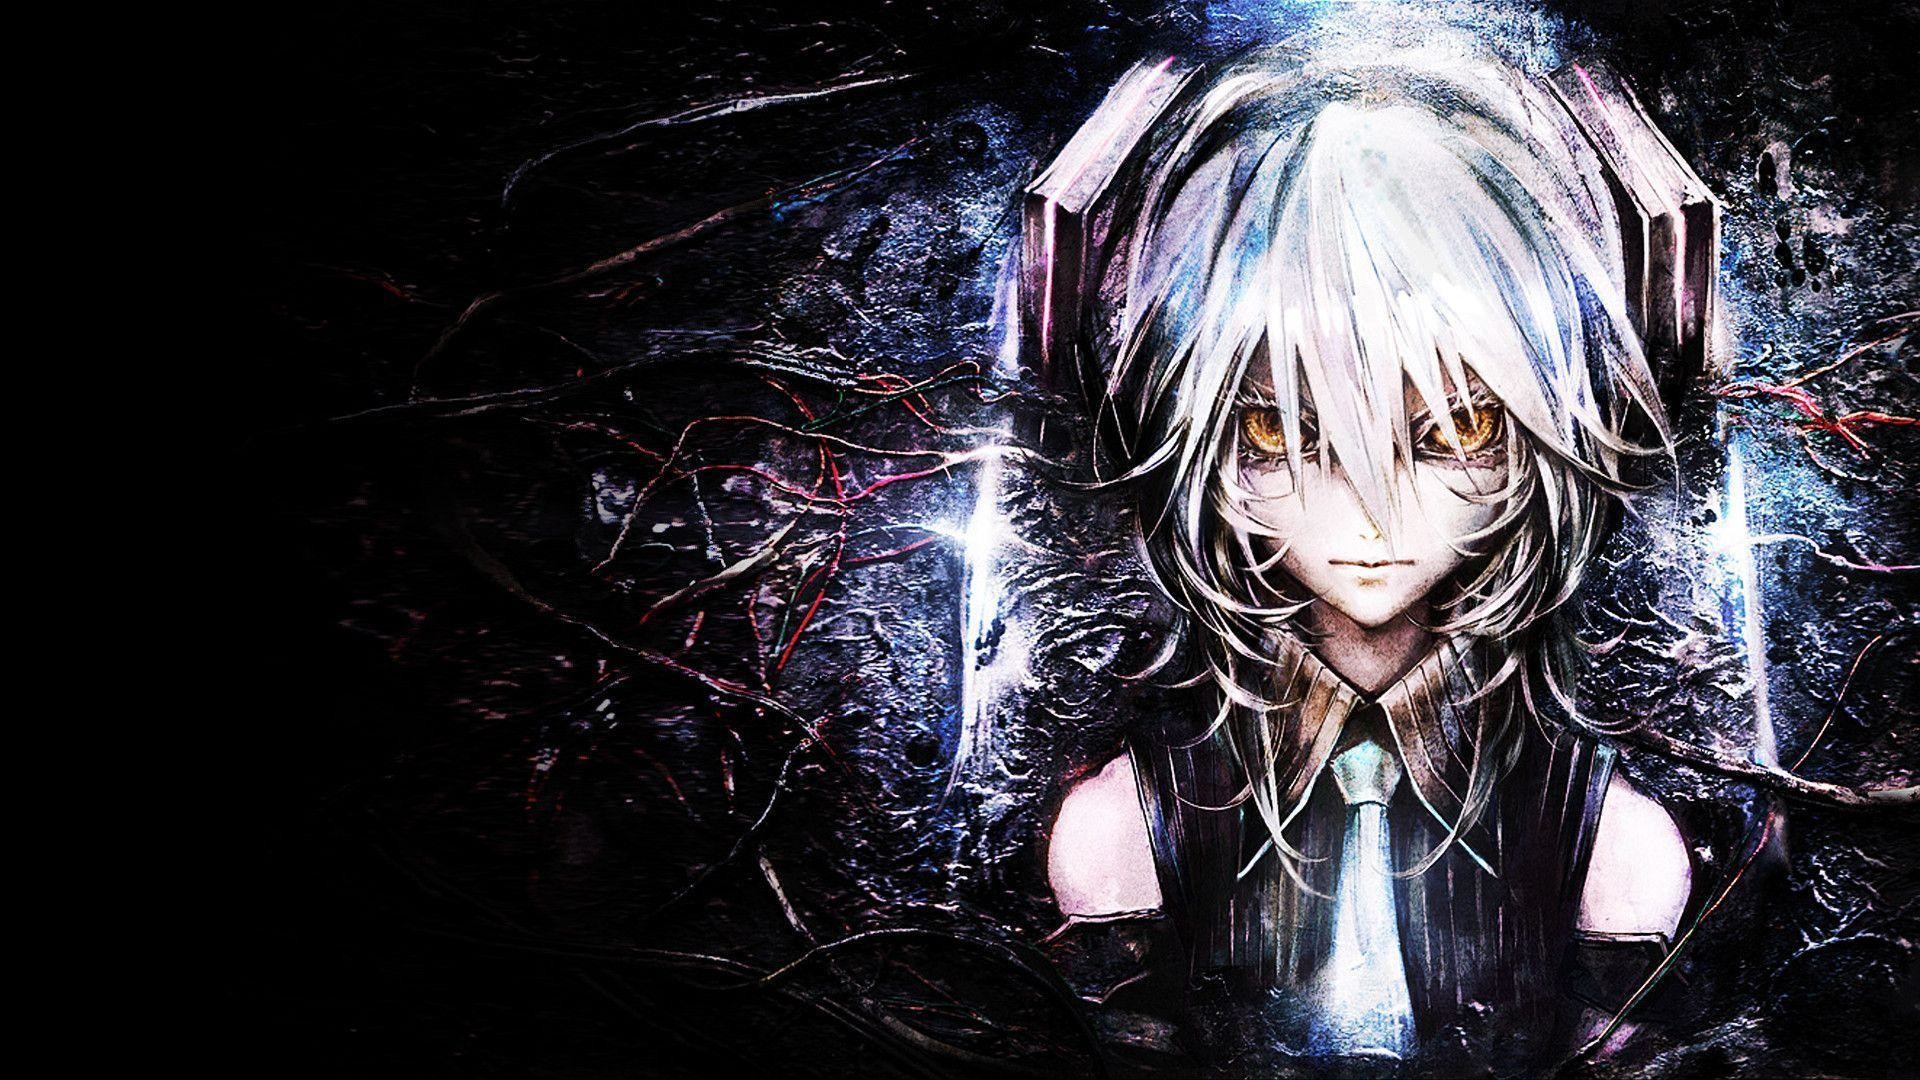 Amazing Anime Wallpapers Hd 85 Images